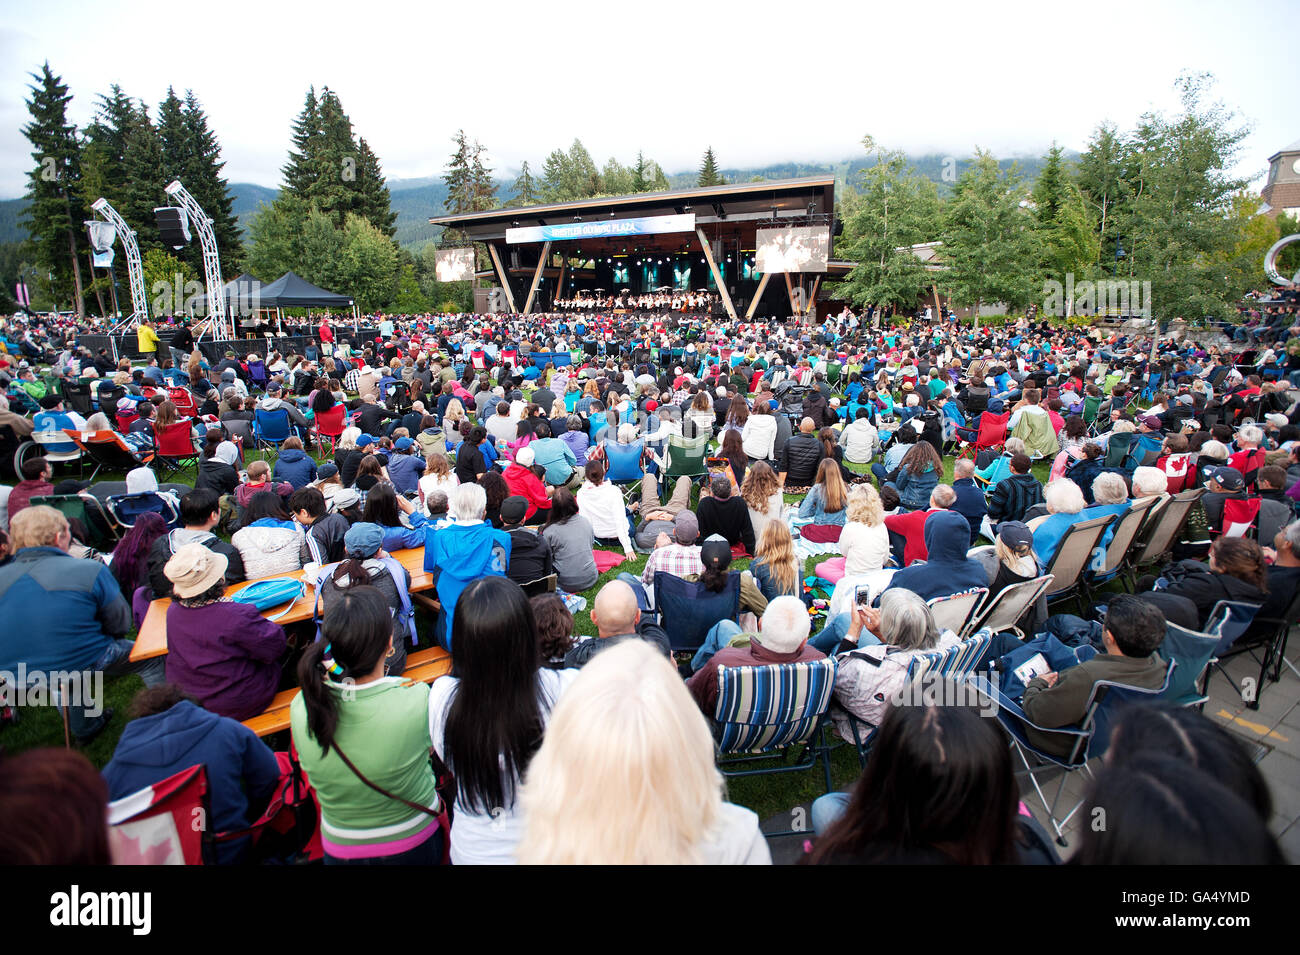 Huge crowds watch the Vancouver Symphony Orchestra during a Canada Day concert at the Whistler Olympic Plaza.  Friday, July 1, 2 Stock Photo